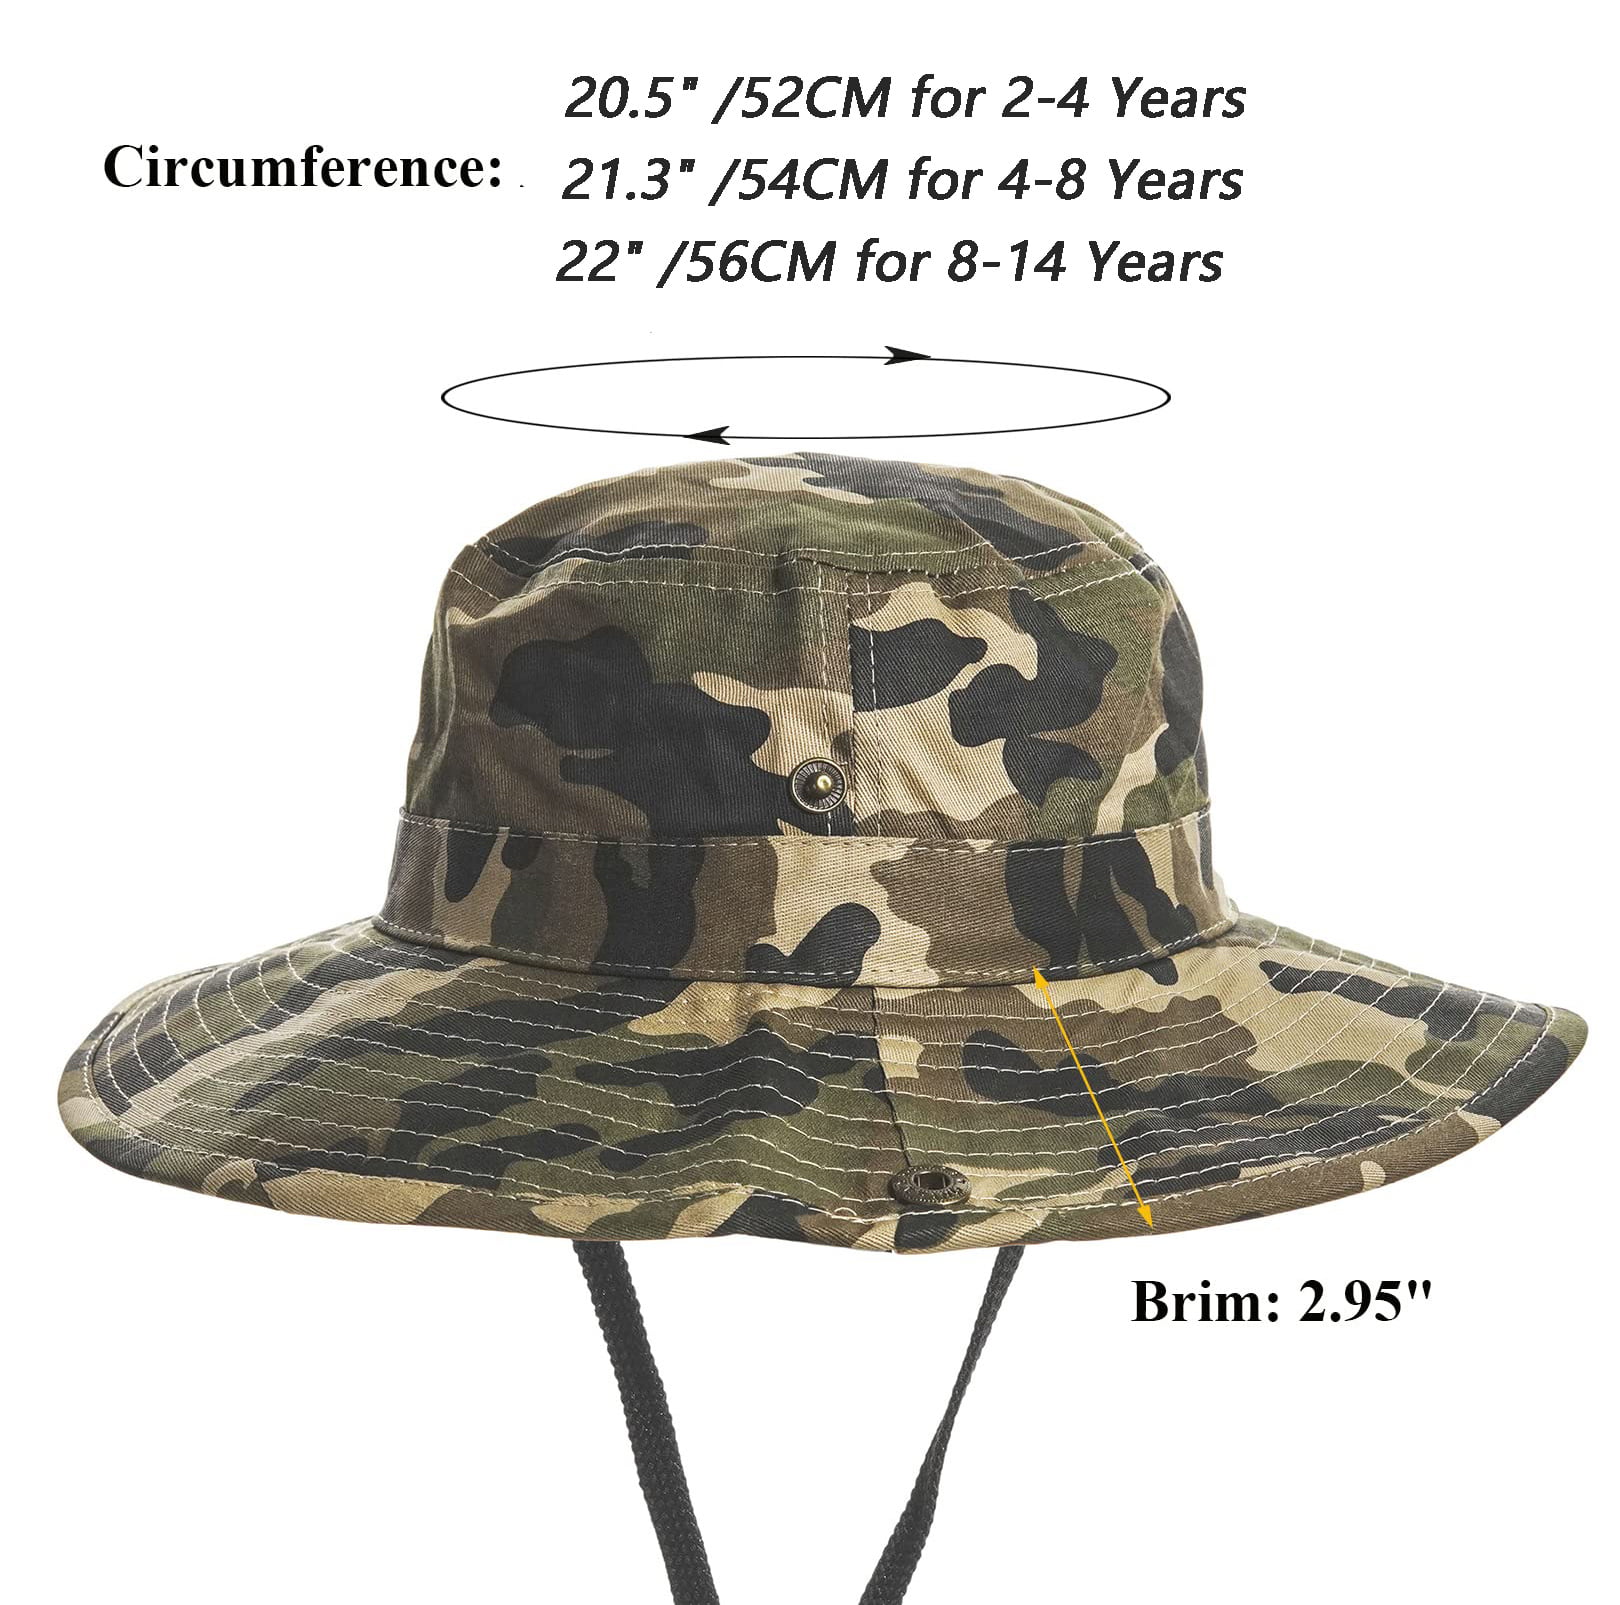 Buy Sun Hat Bucket-Boys-Camouflage Hats Fishman Cap Packable (Camo,56cm  Suggested for 7-14years Old Kids) at